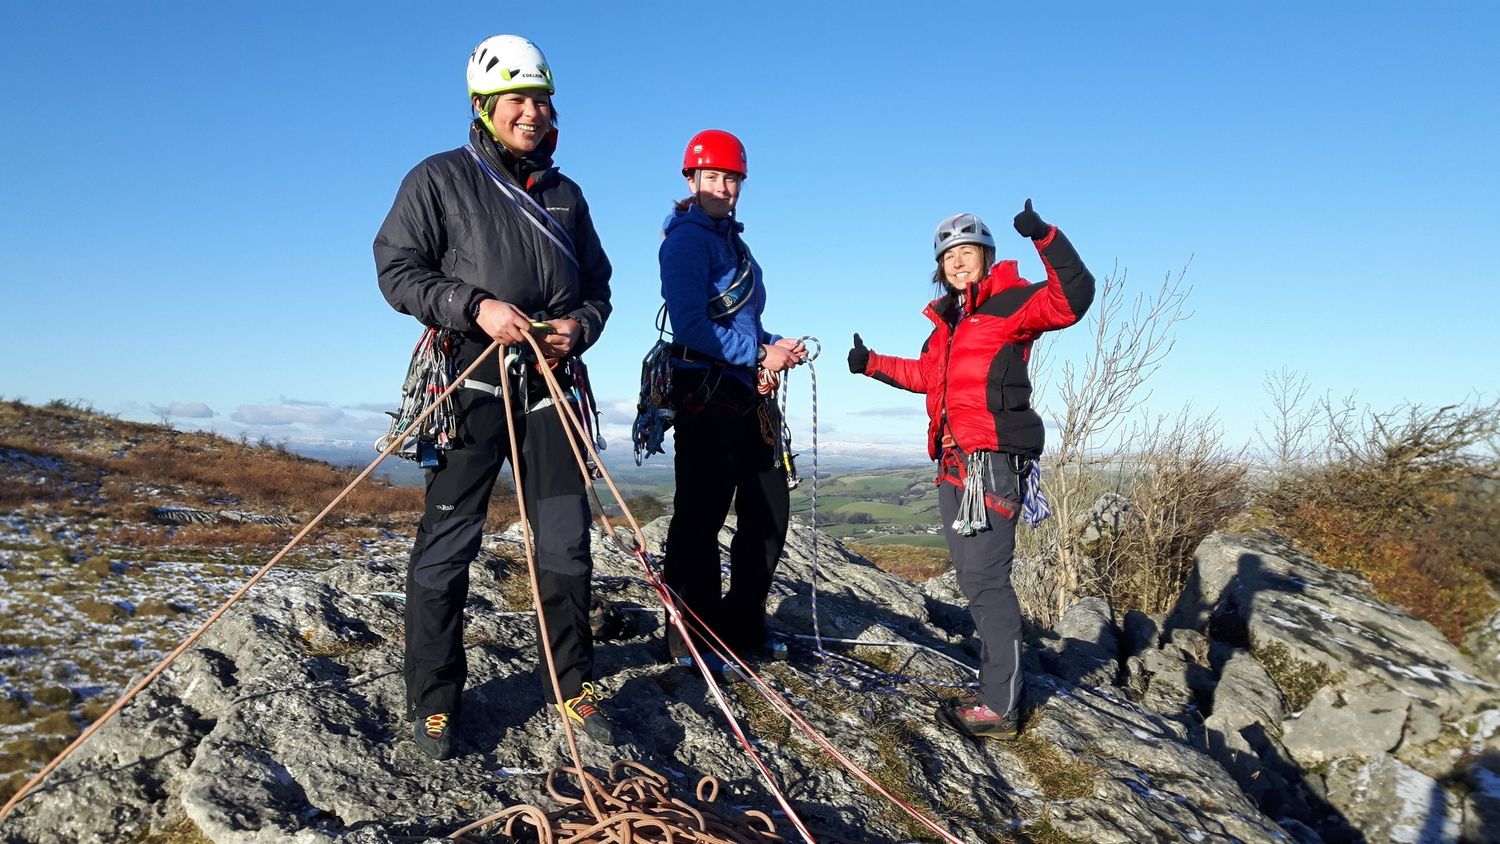  Setting up a belay at the top of a route on a Rock Climbing Instructor course - Chris Ensoll Mountain Guide 